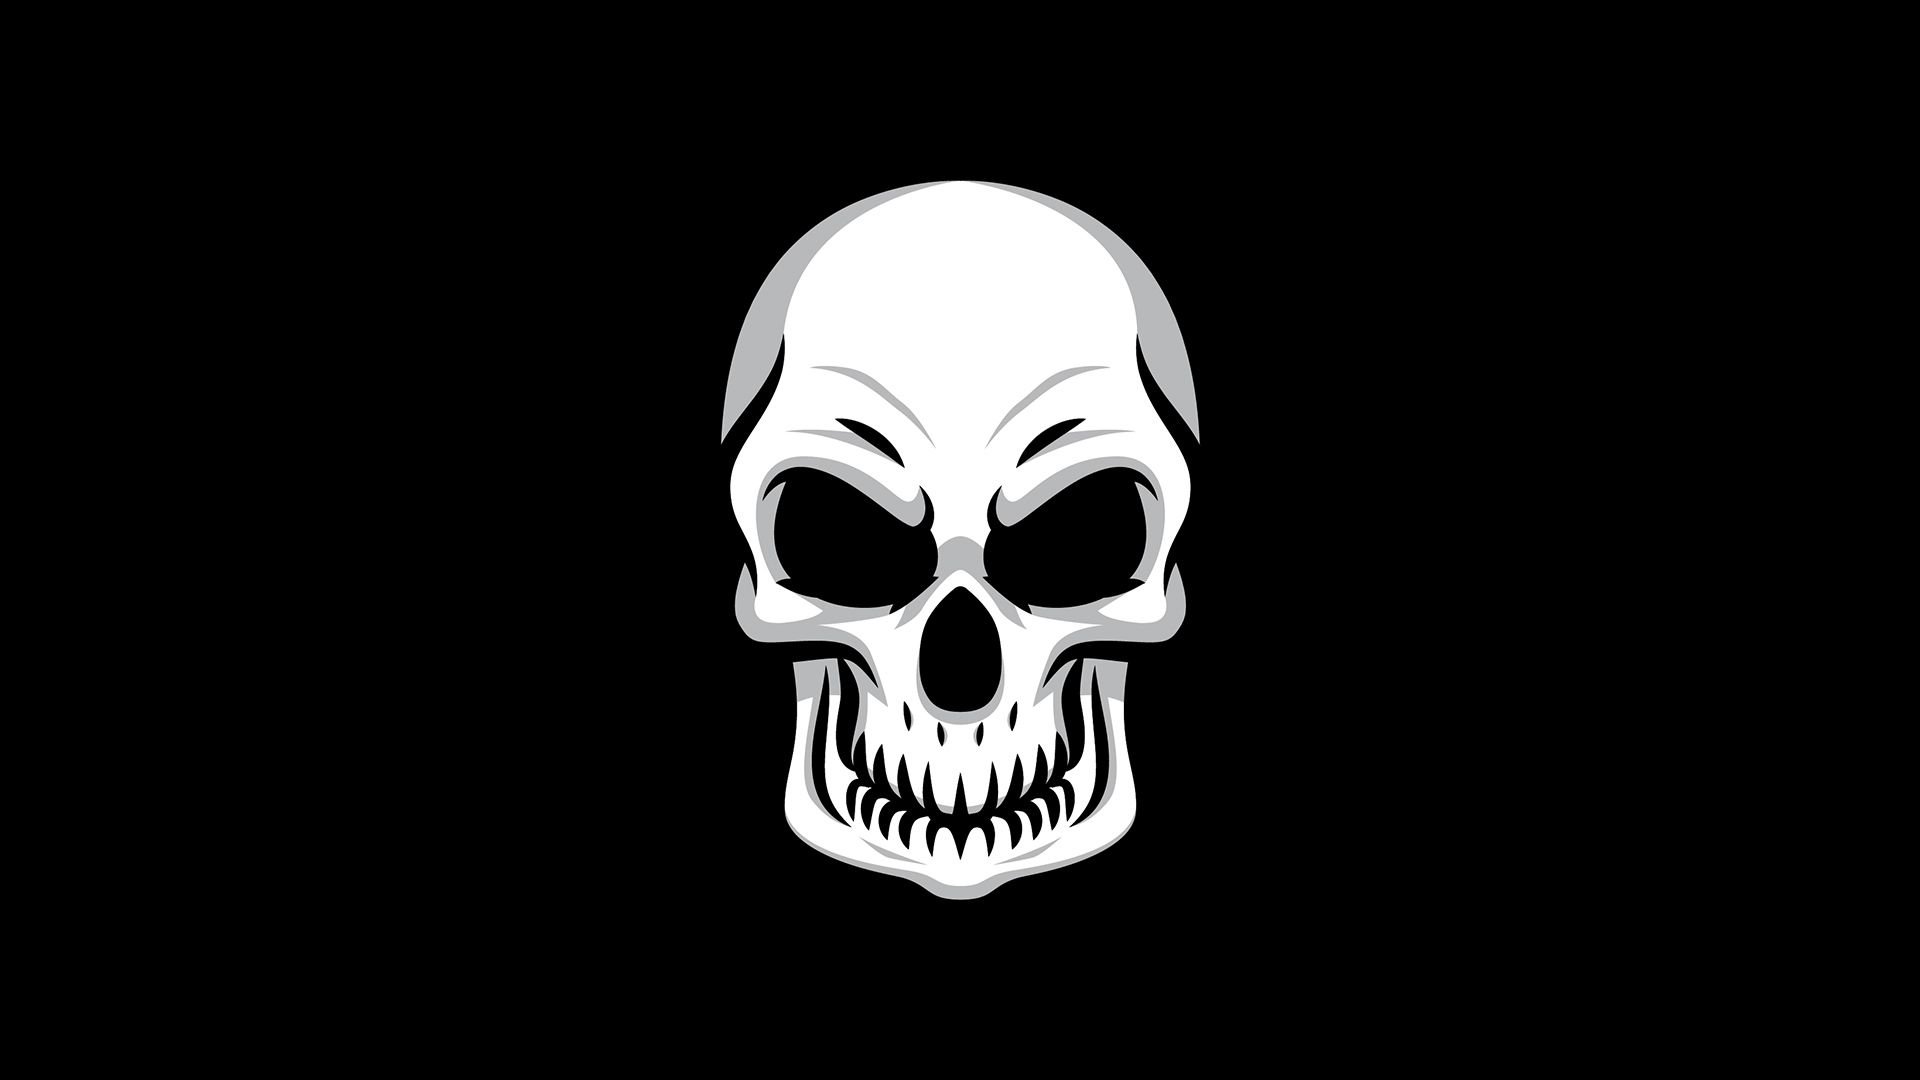 Skull Minimal, HD Others, 4k Wallpapers, Image, Backgrounds, Photos and Pic...